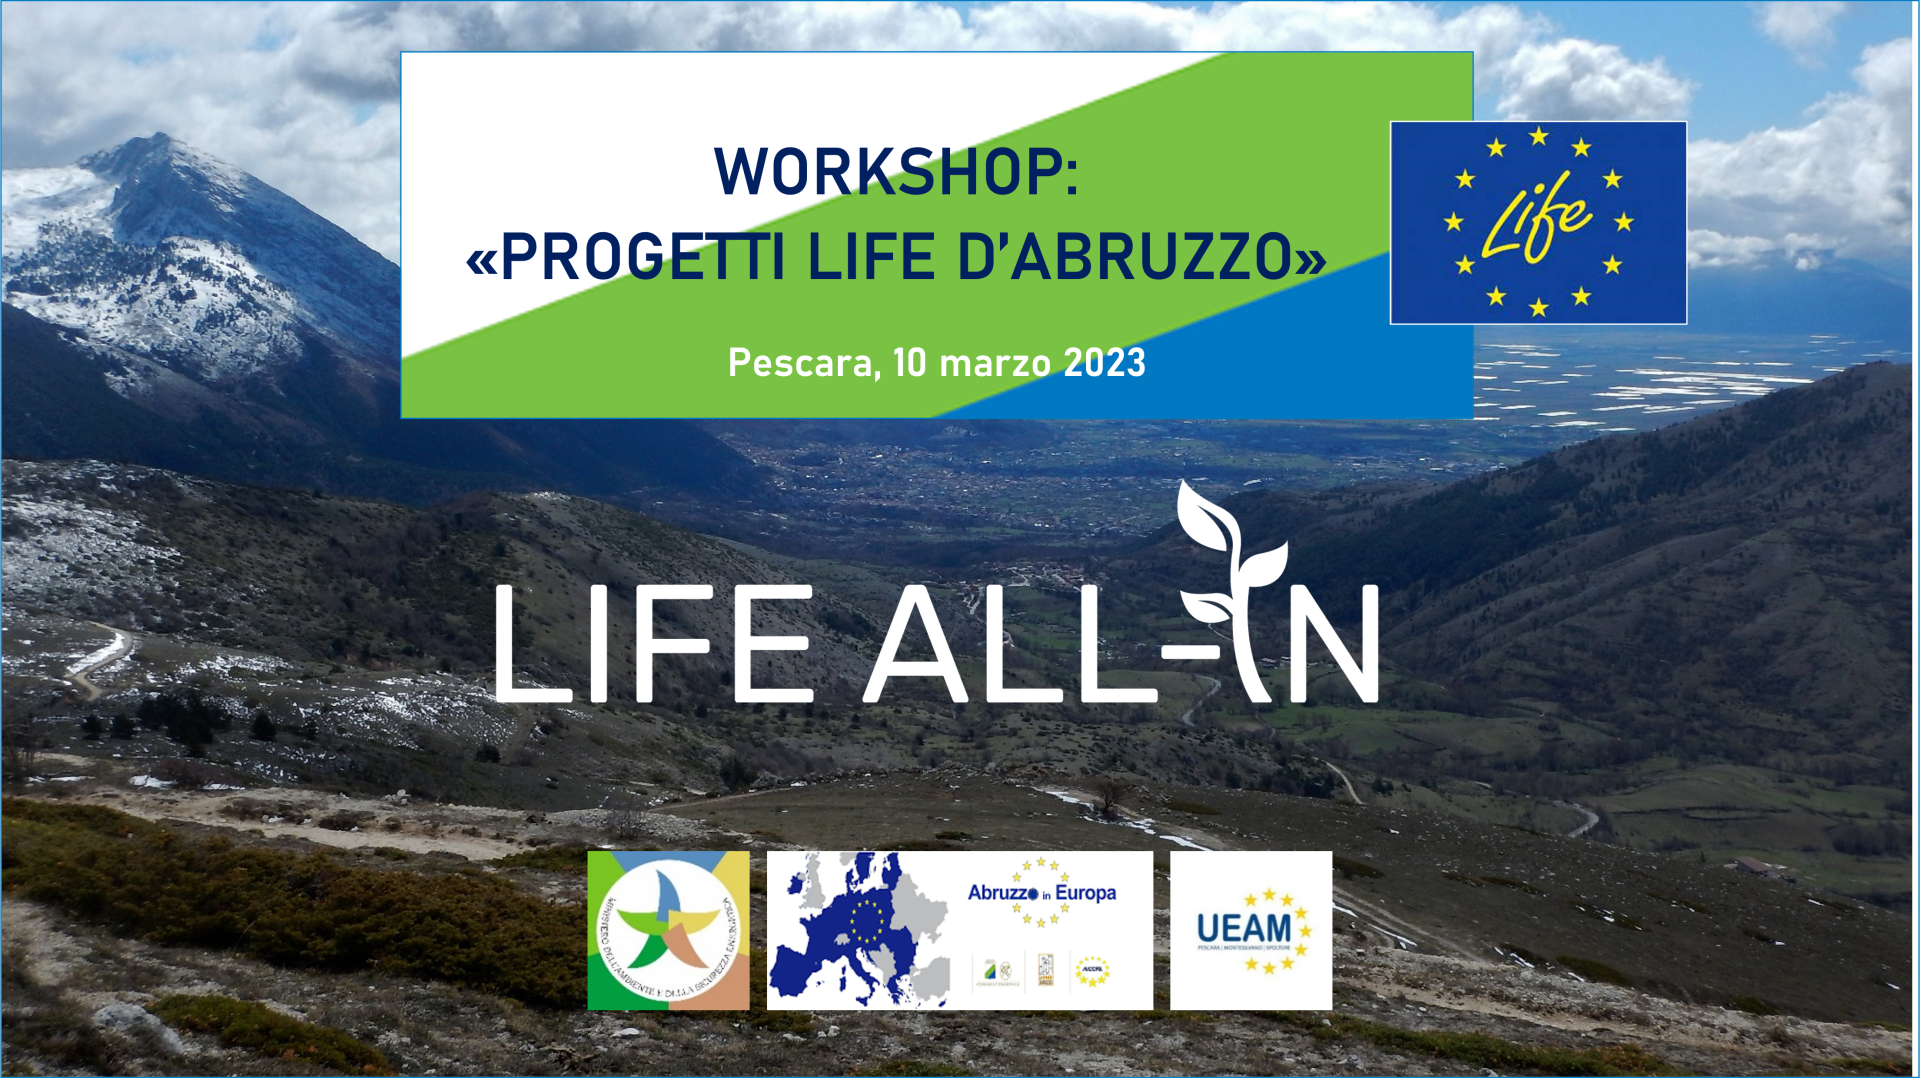 powerpoint-progetti-life-d-abruzzo.png